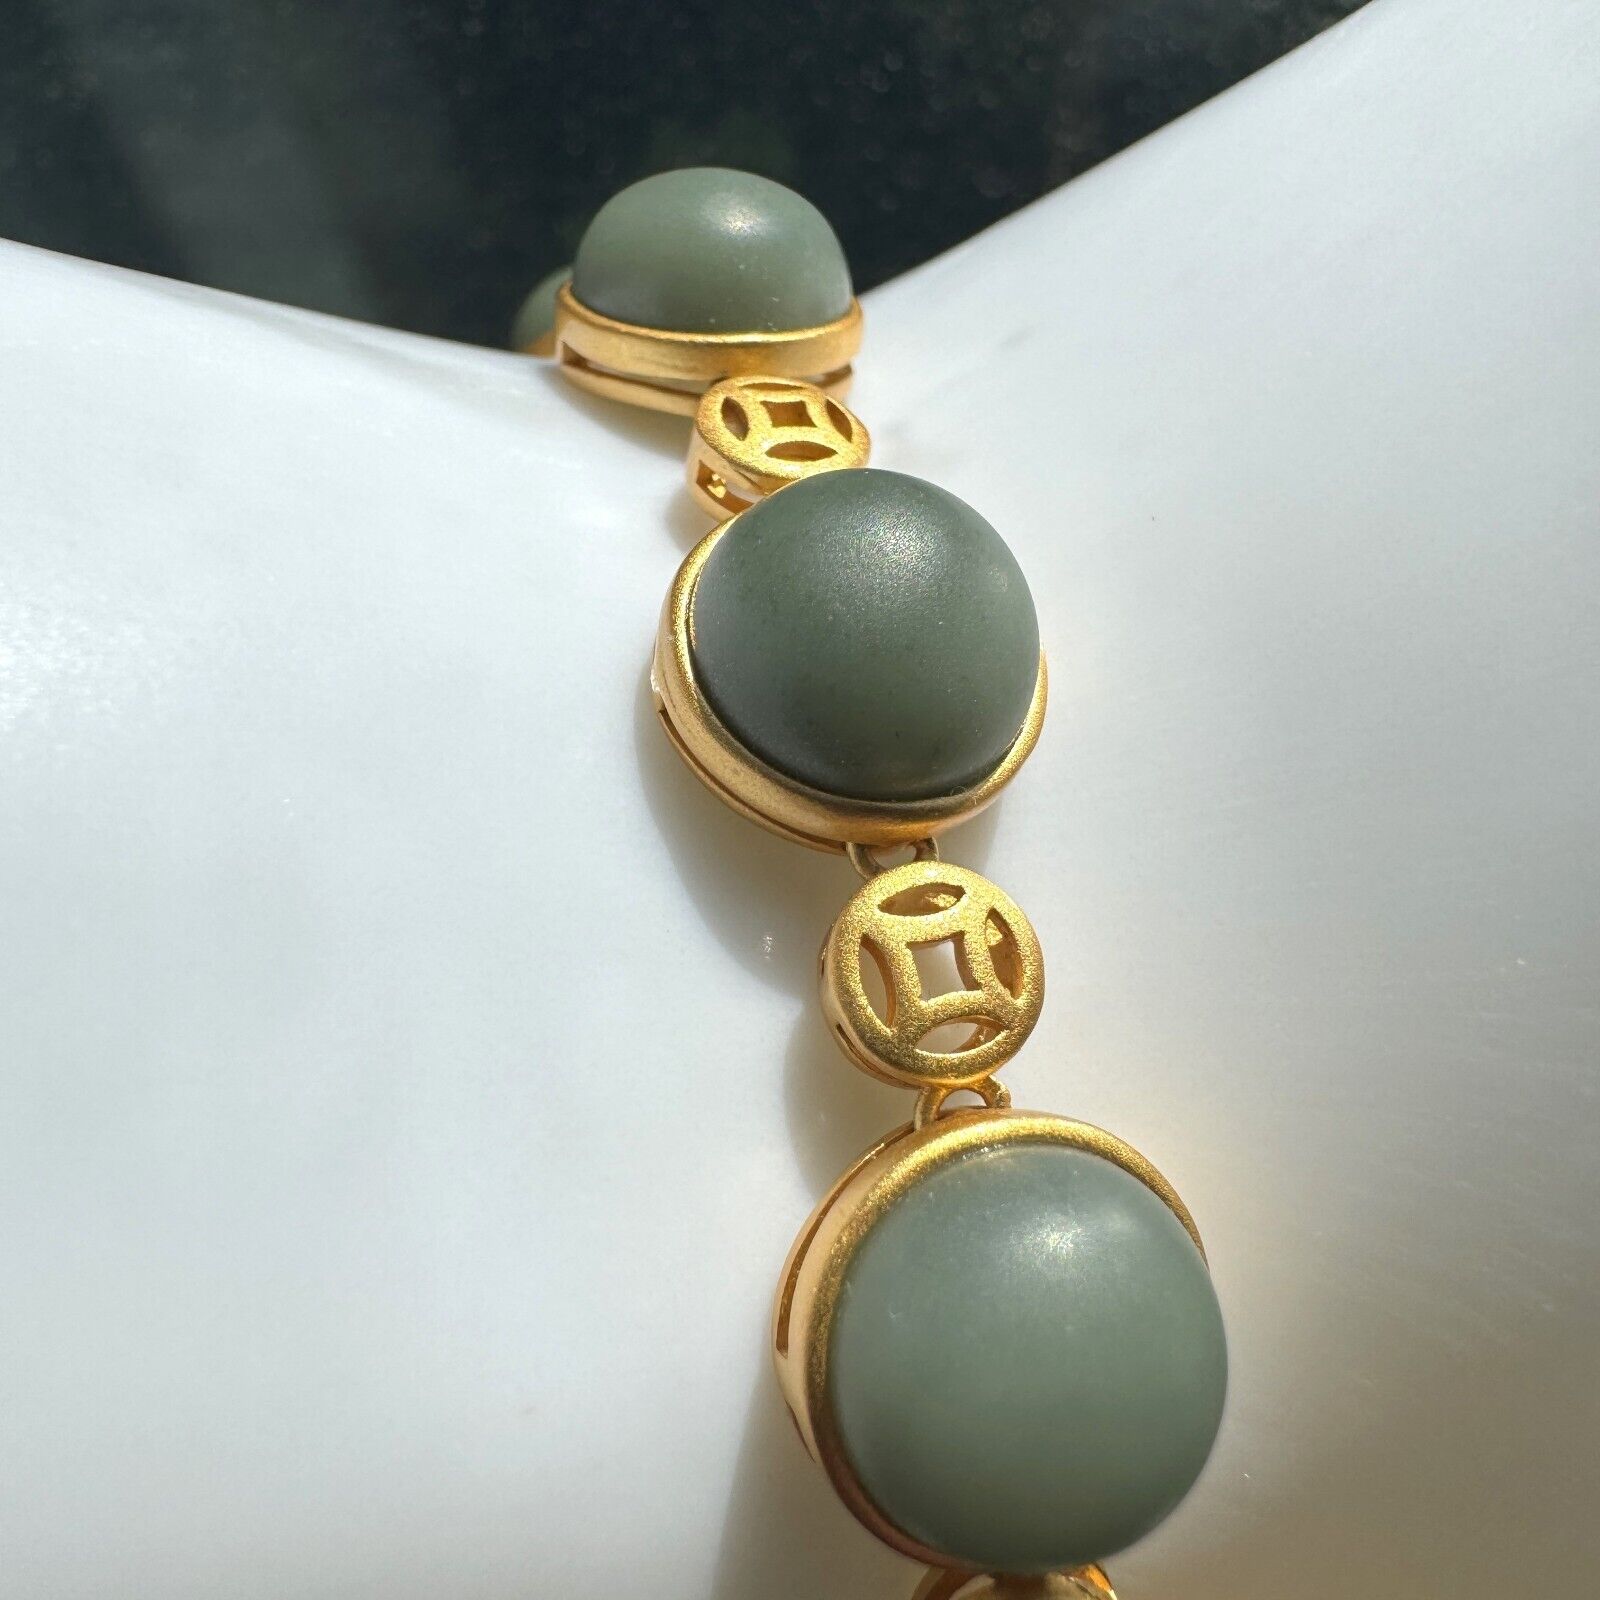 Matte Polished Nephrite Hetian Jade Bracelet with 925 Sterling Silver Accents